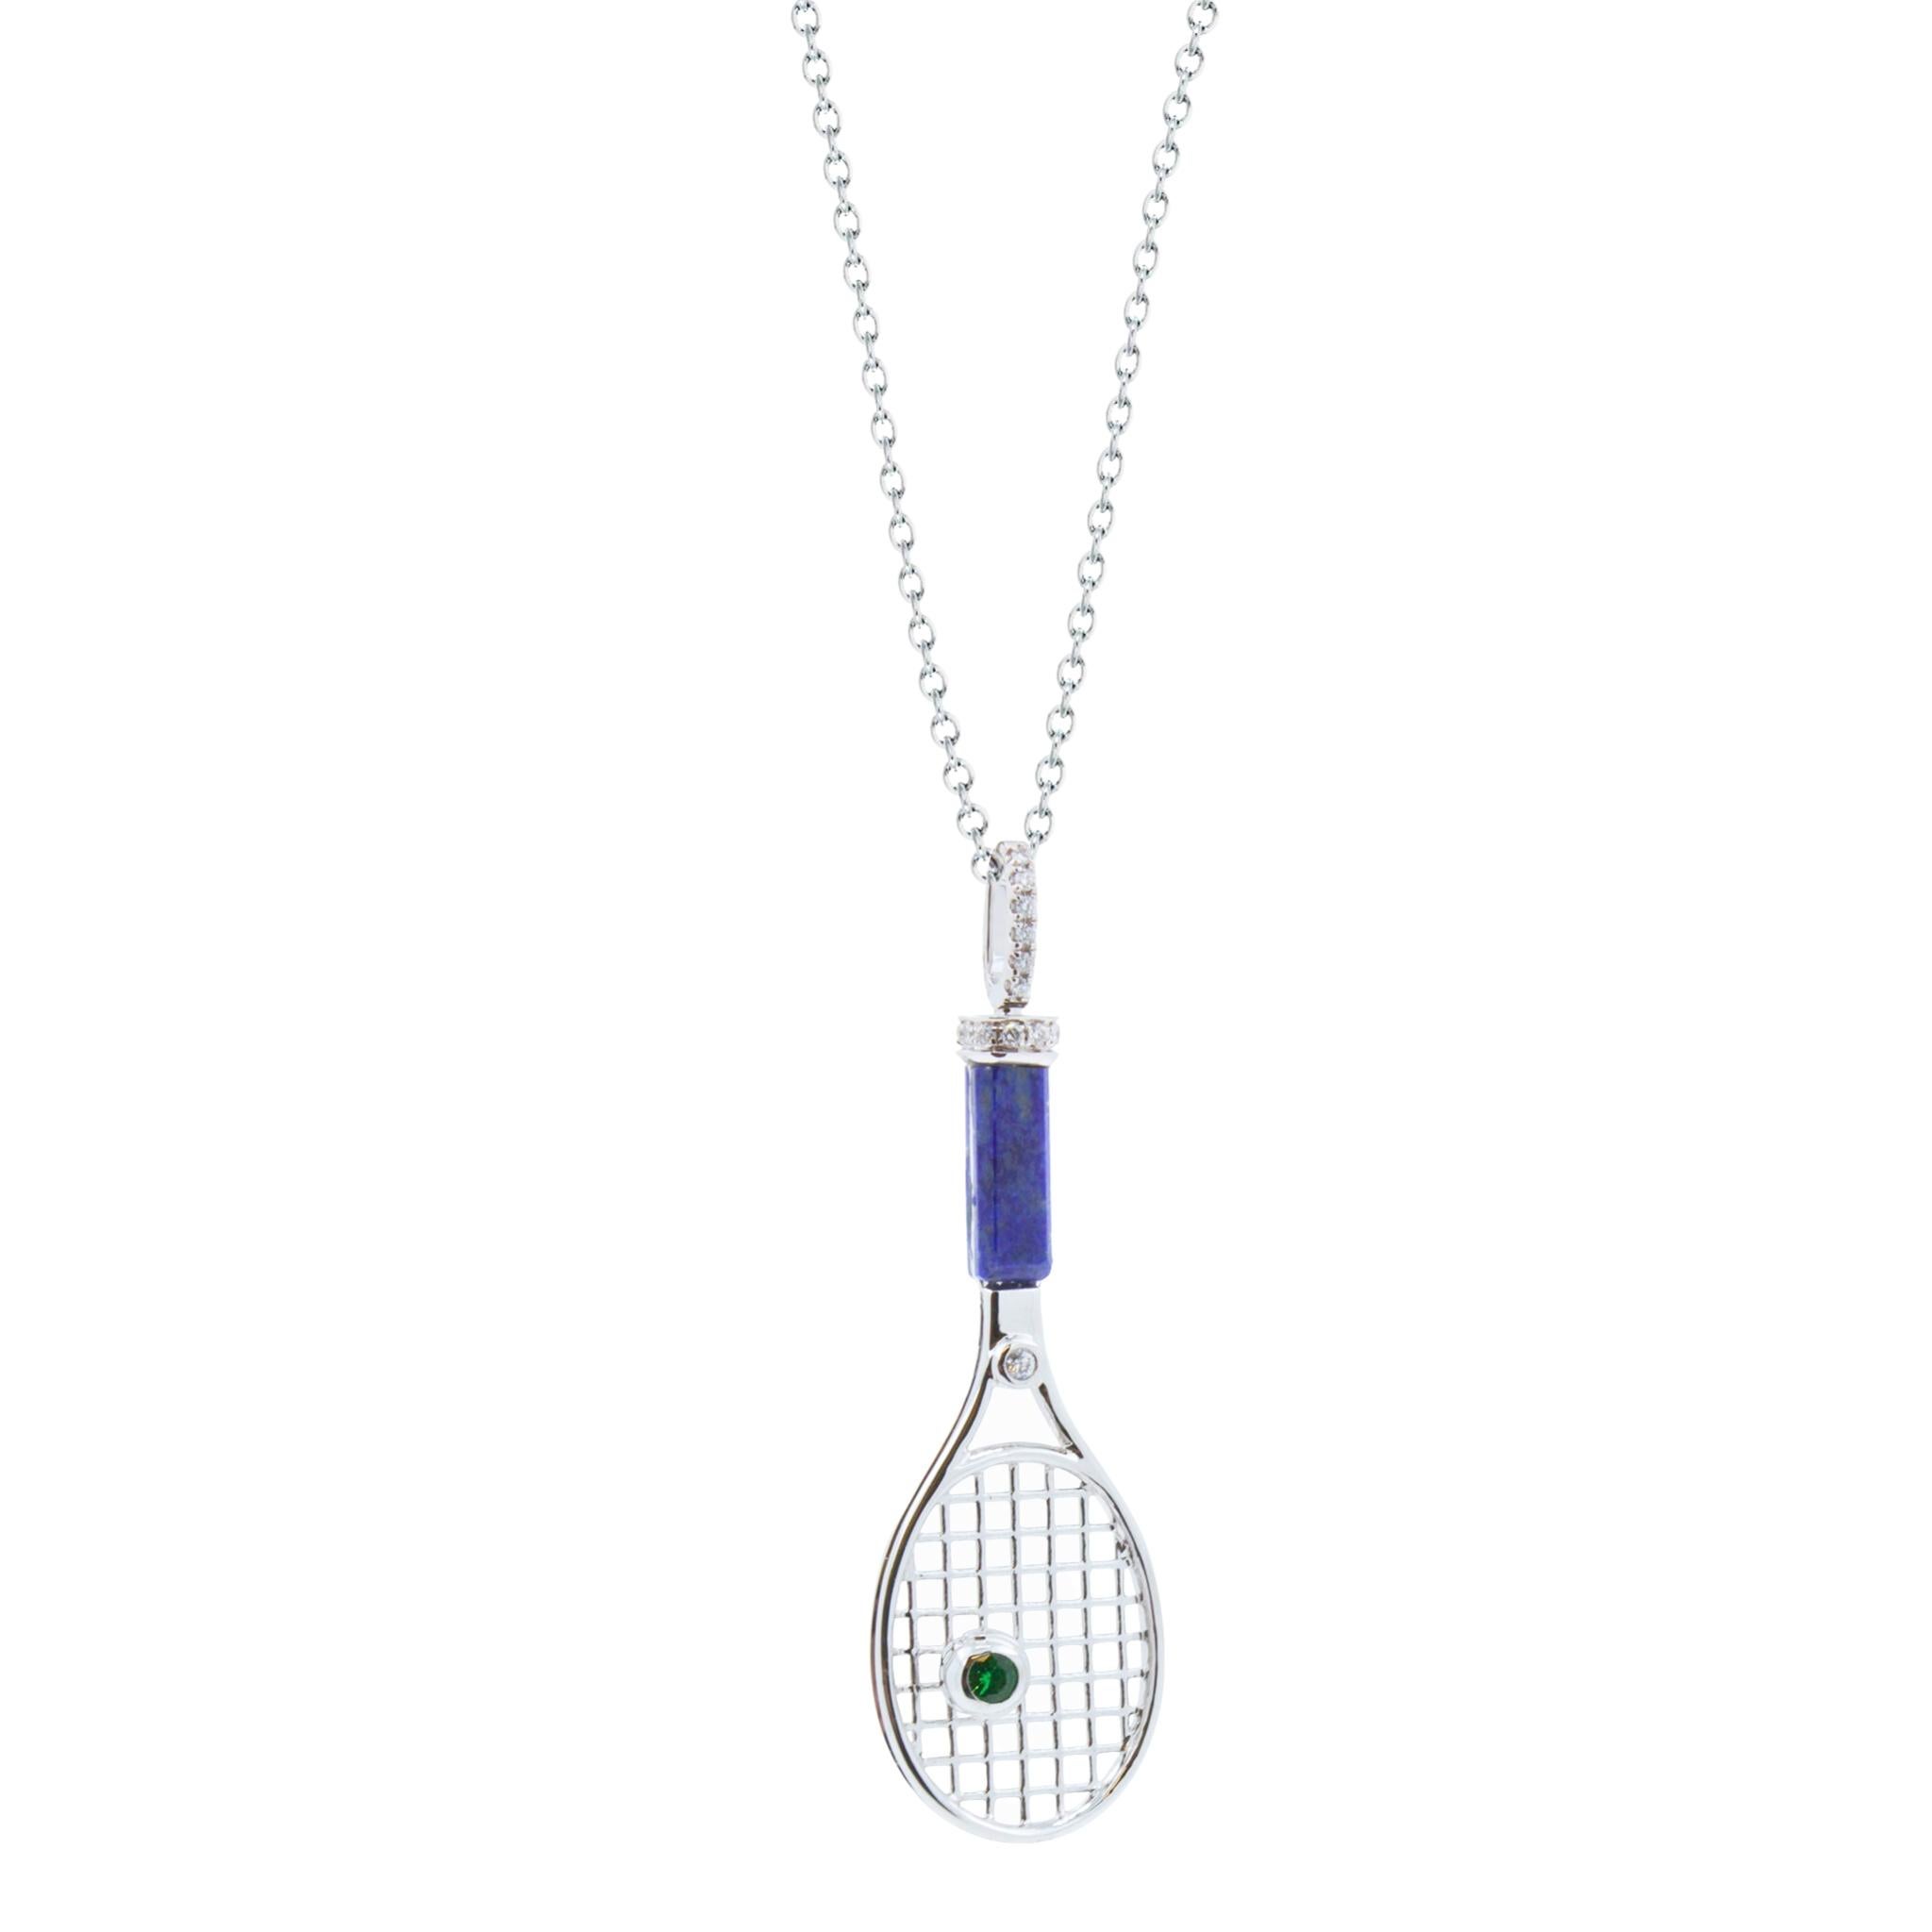 18K White Gold
Blue Lapis Lazuli Gemstone Handle
Green Emerald Tennis Ball Gemstone
0.25 cts Diamonds
16-18 inches Diamond-Cut Link Cable chain length
In-Stock
This is part of Galt & Bro. Jewelry's exclusive, custom made-to-order Ace Collection. We